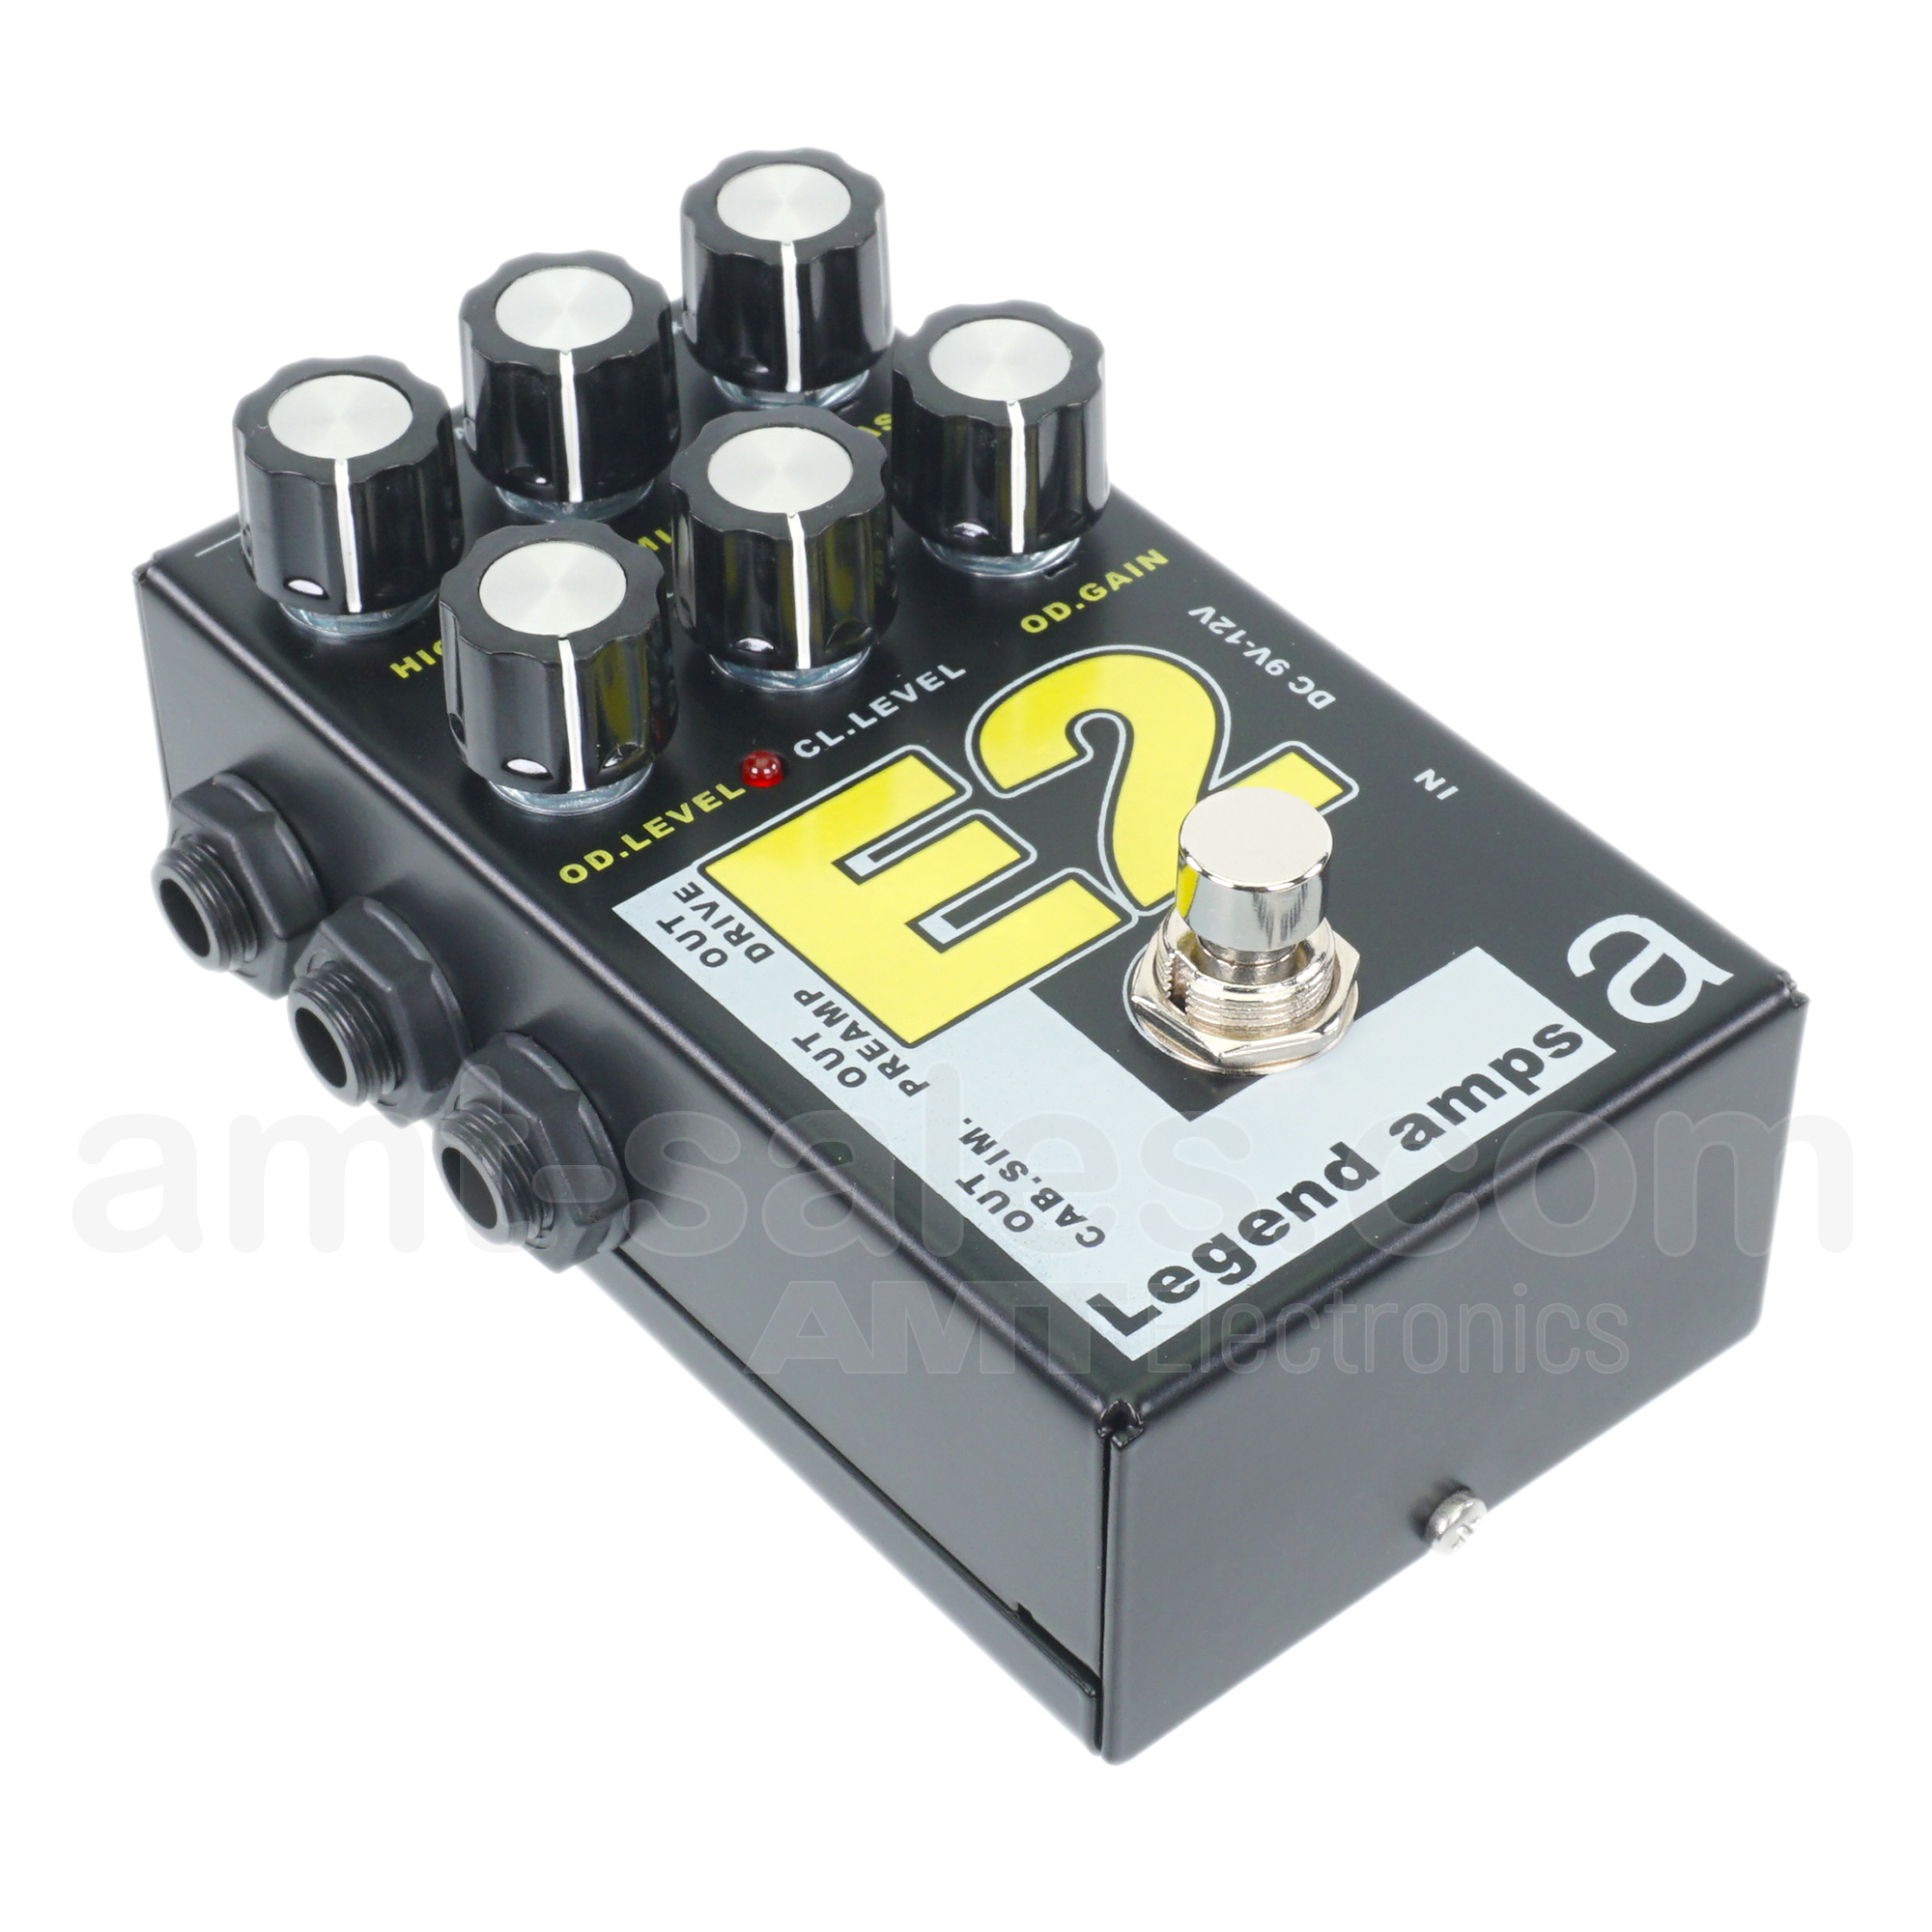 AMT E2 - 2 channels guitar preamp/distortion pedal (Engl)